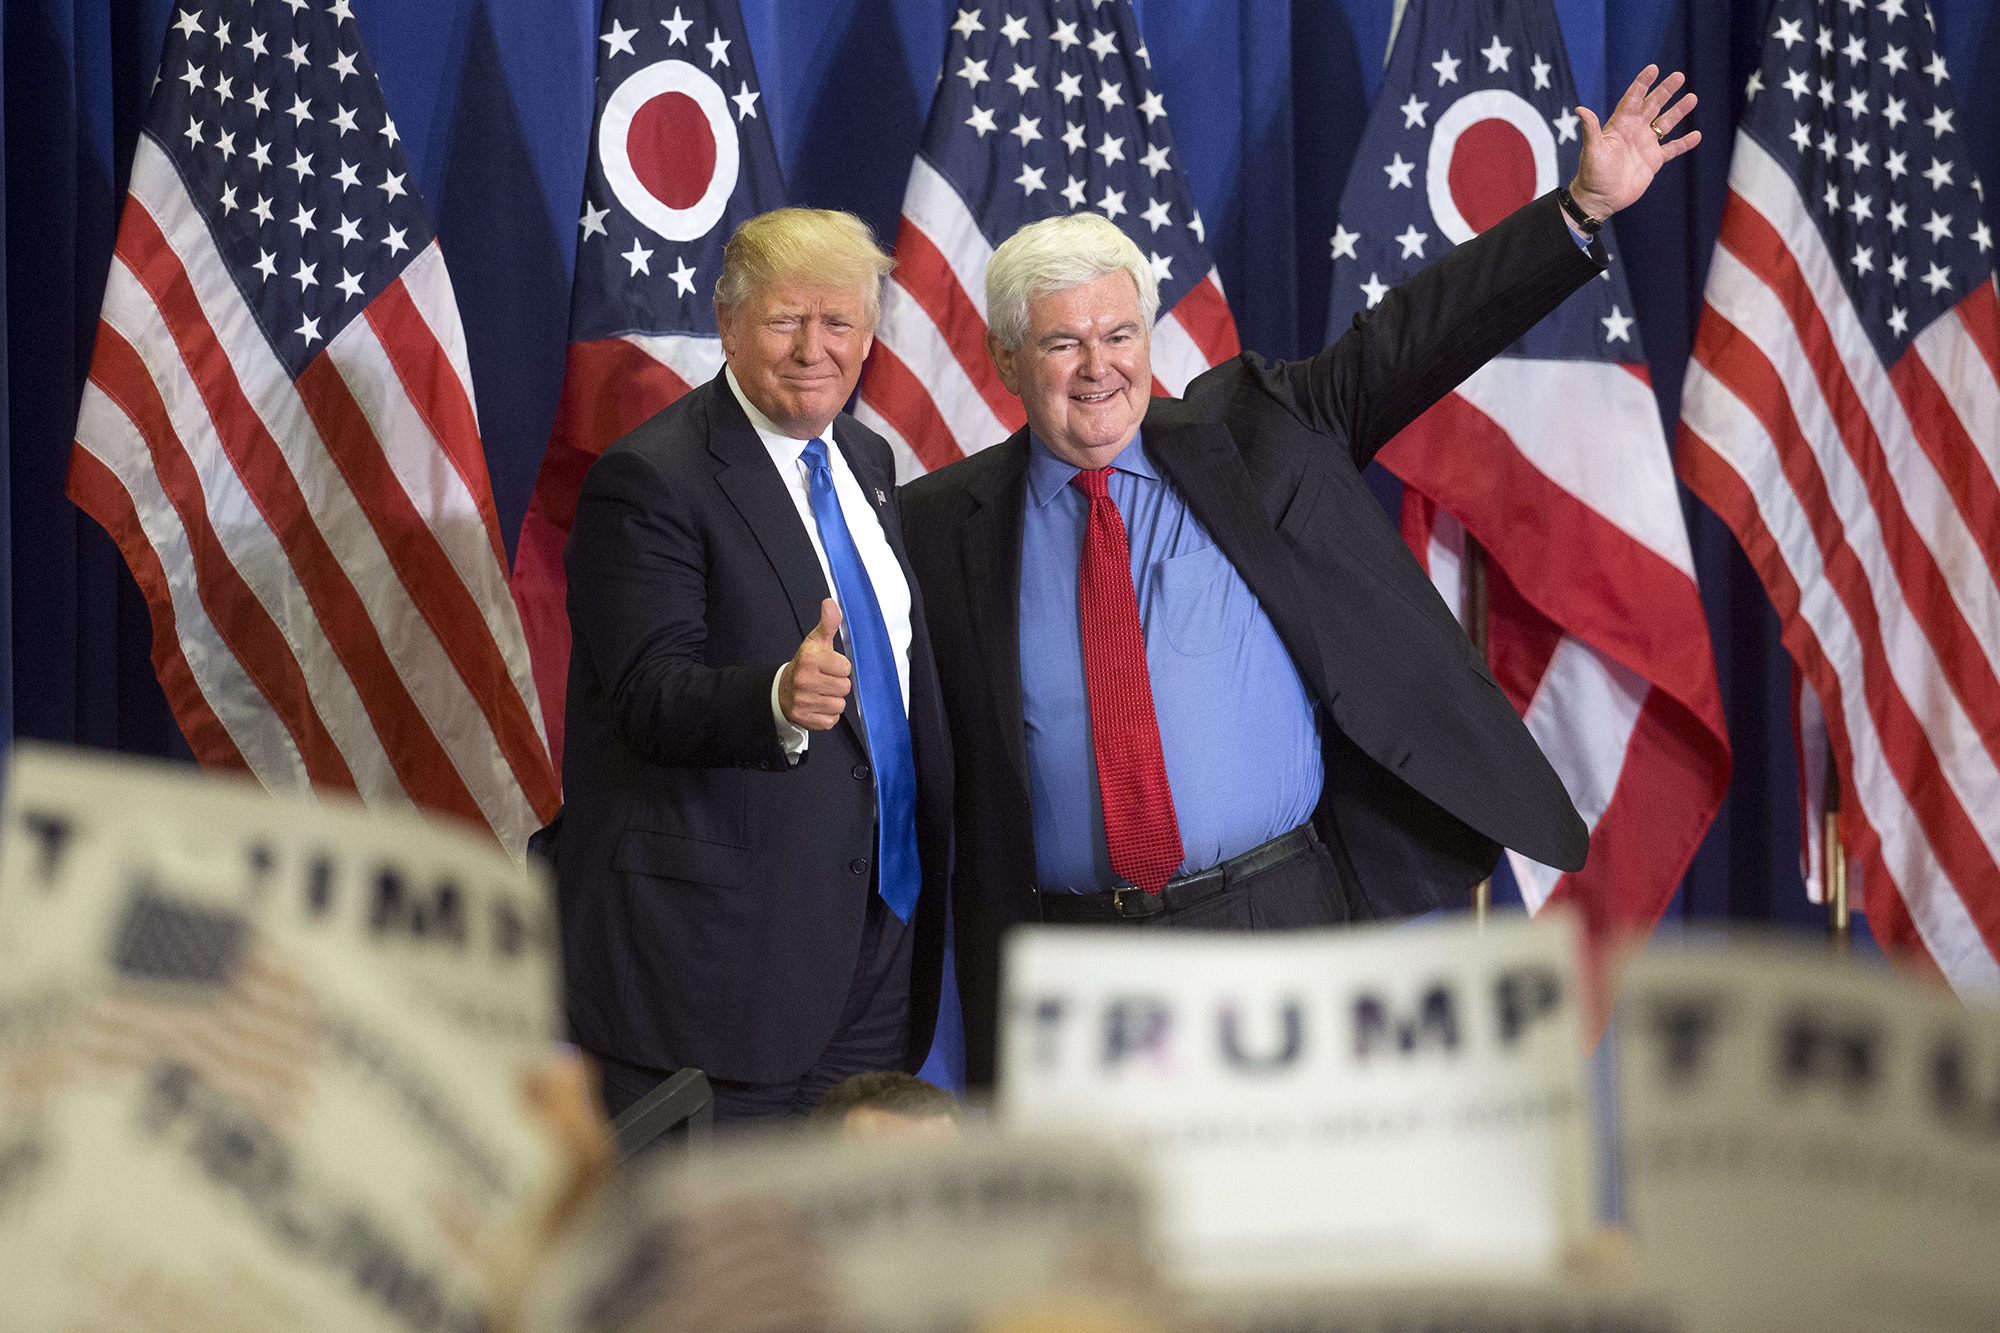 PHOTO: Republican presidential candidate Donald Trump and former House Speaker Newt Gingrich appear together at a campaign rally on July 6, 2016, in Cincinnati, Ohio.